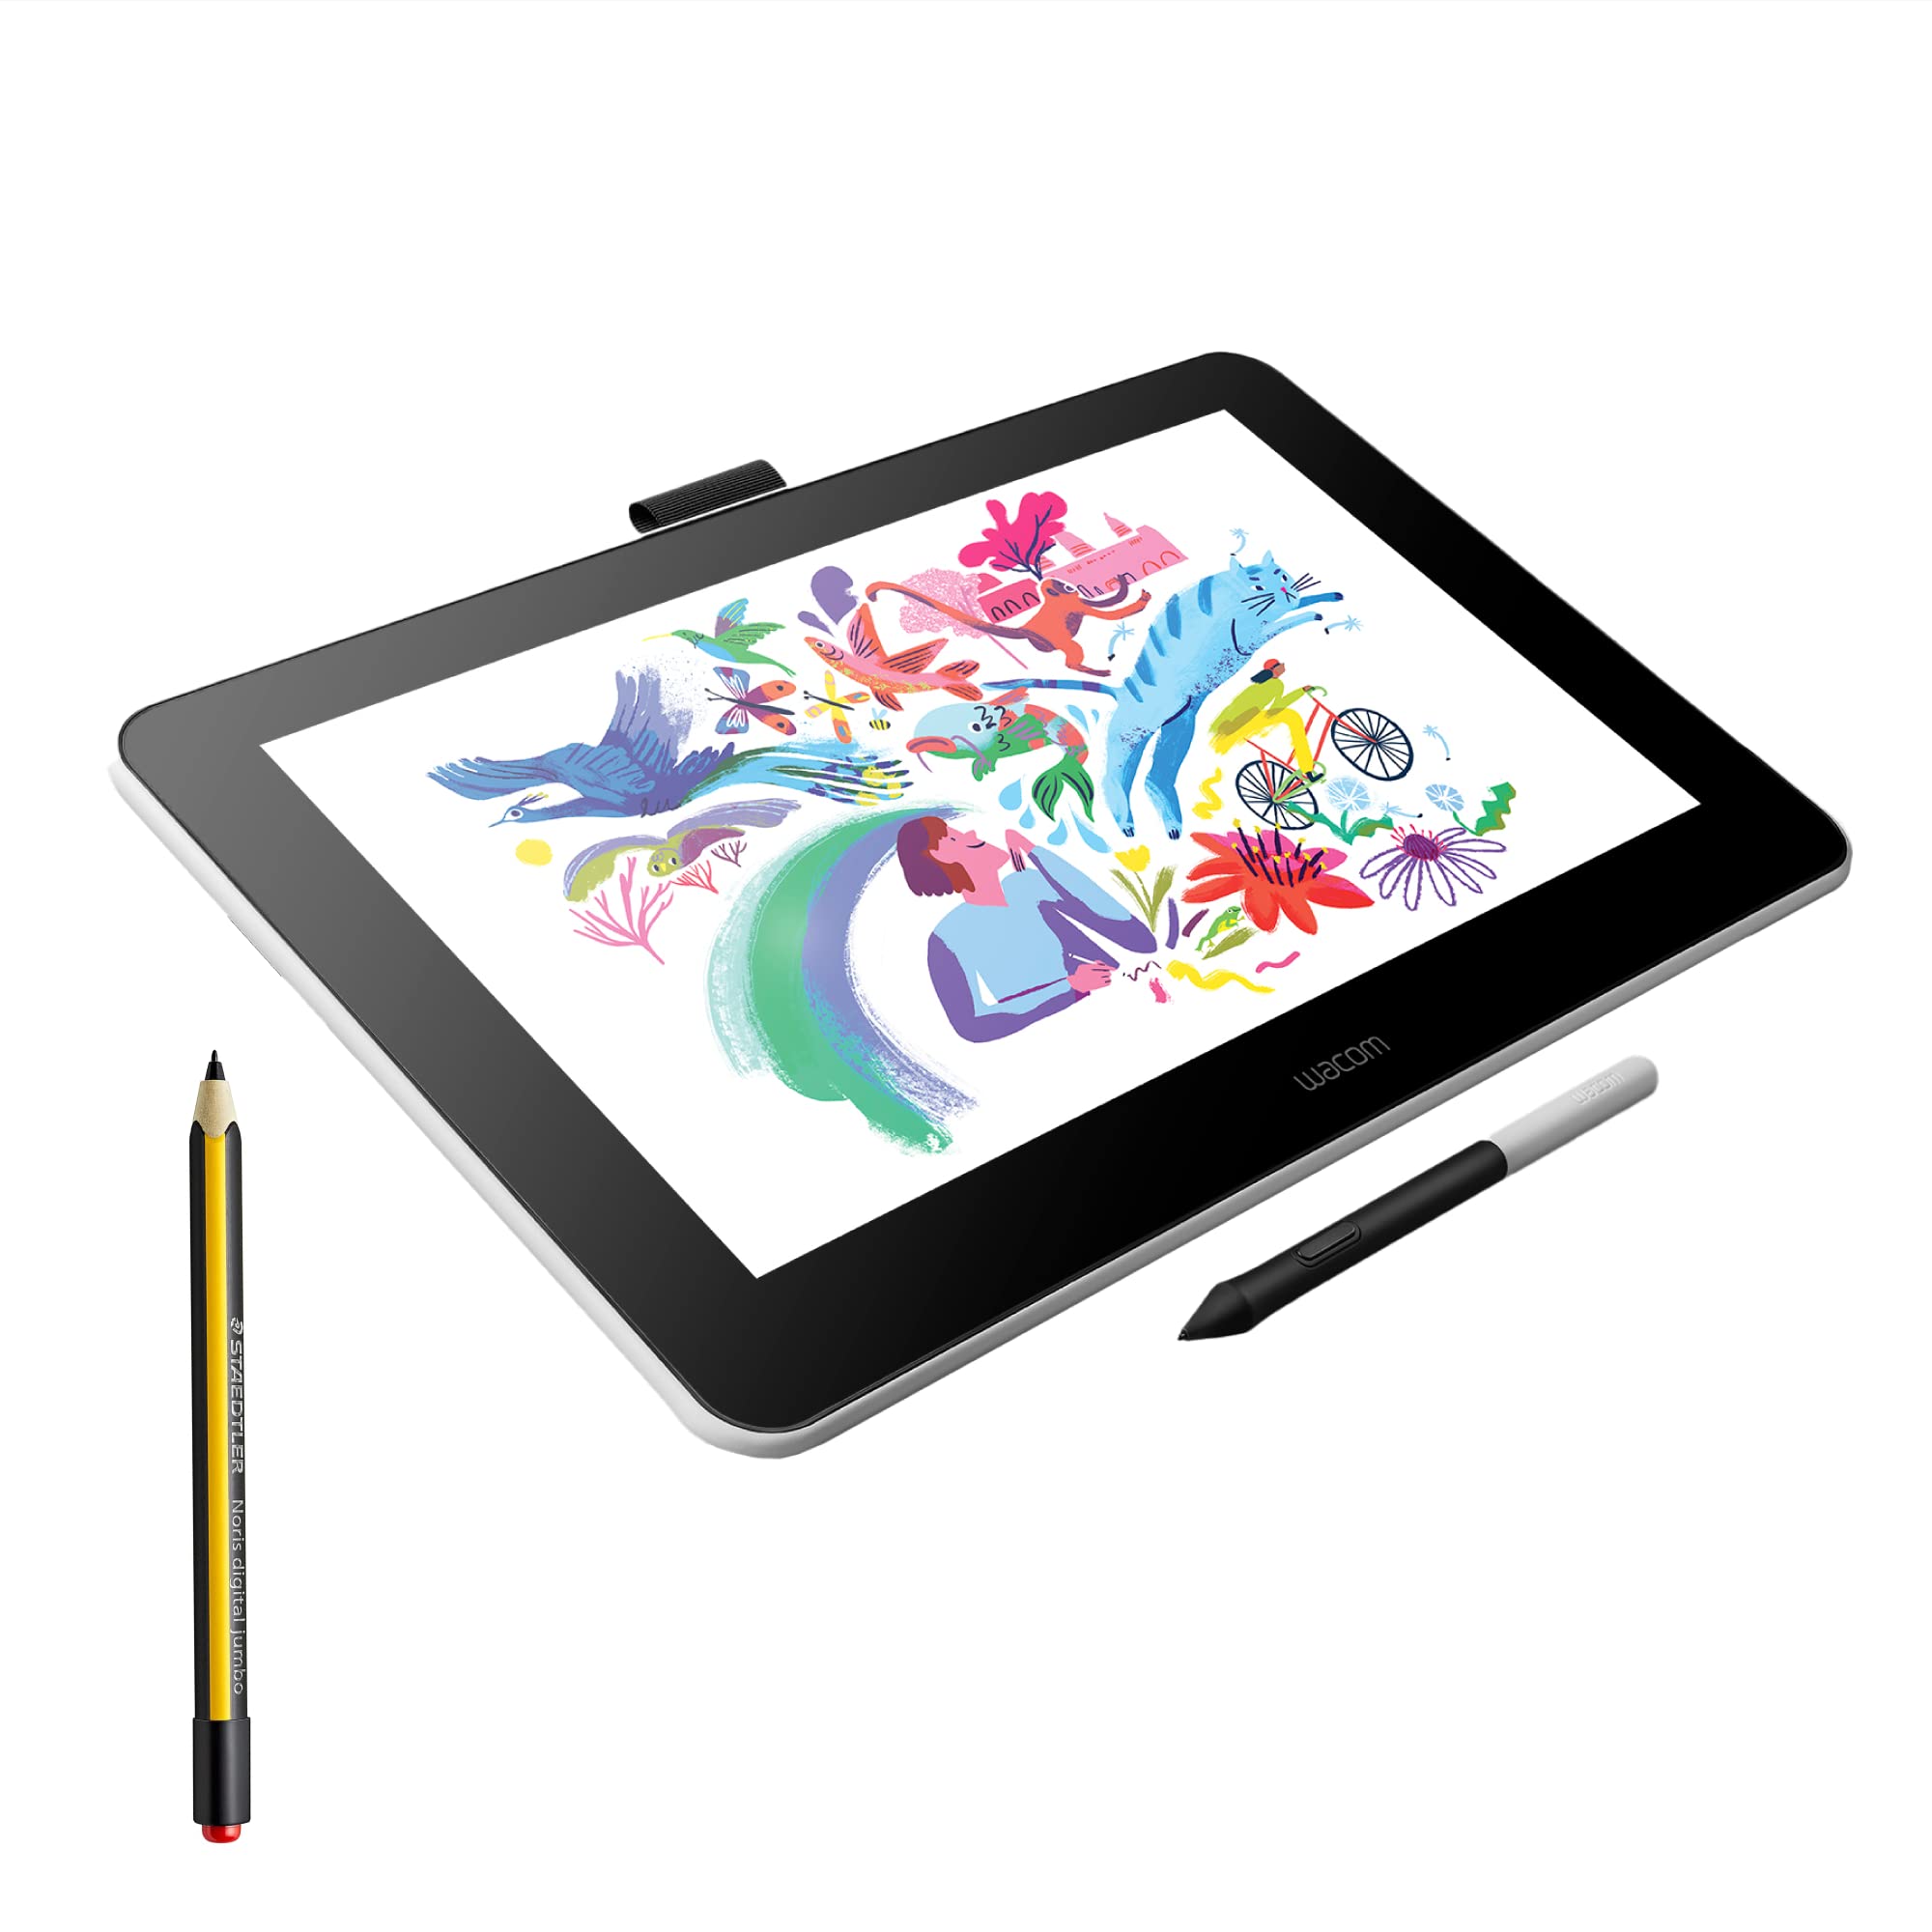 What sort of tablet should I buy for drawing? | Technology | The Guardian